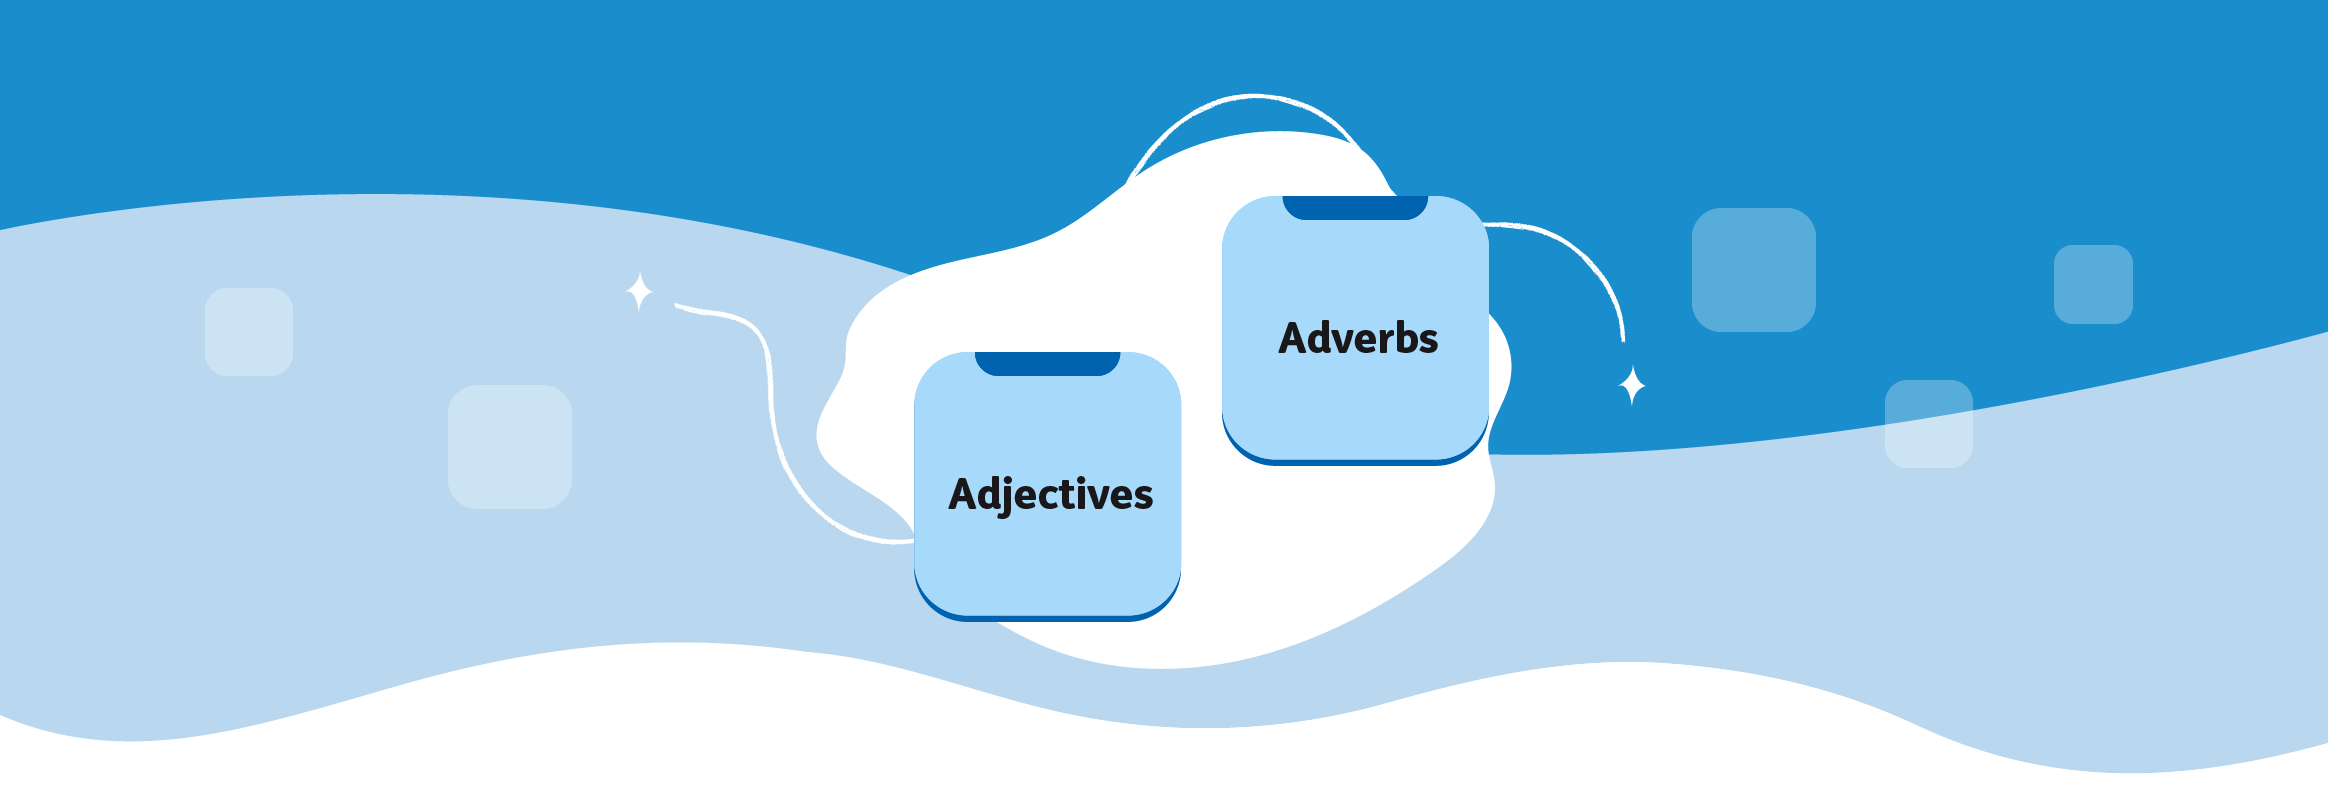 An image of two folders on a blue background with the words Adjectives and Adverbs written on them